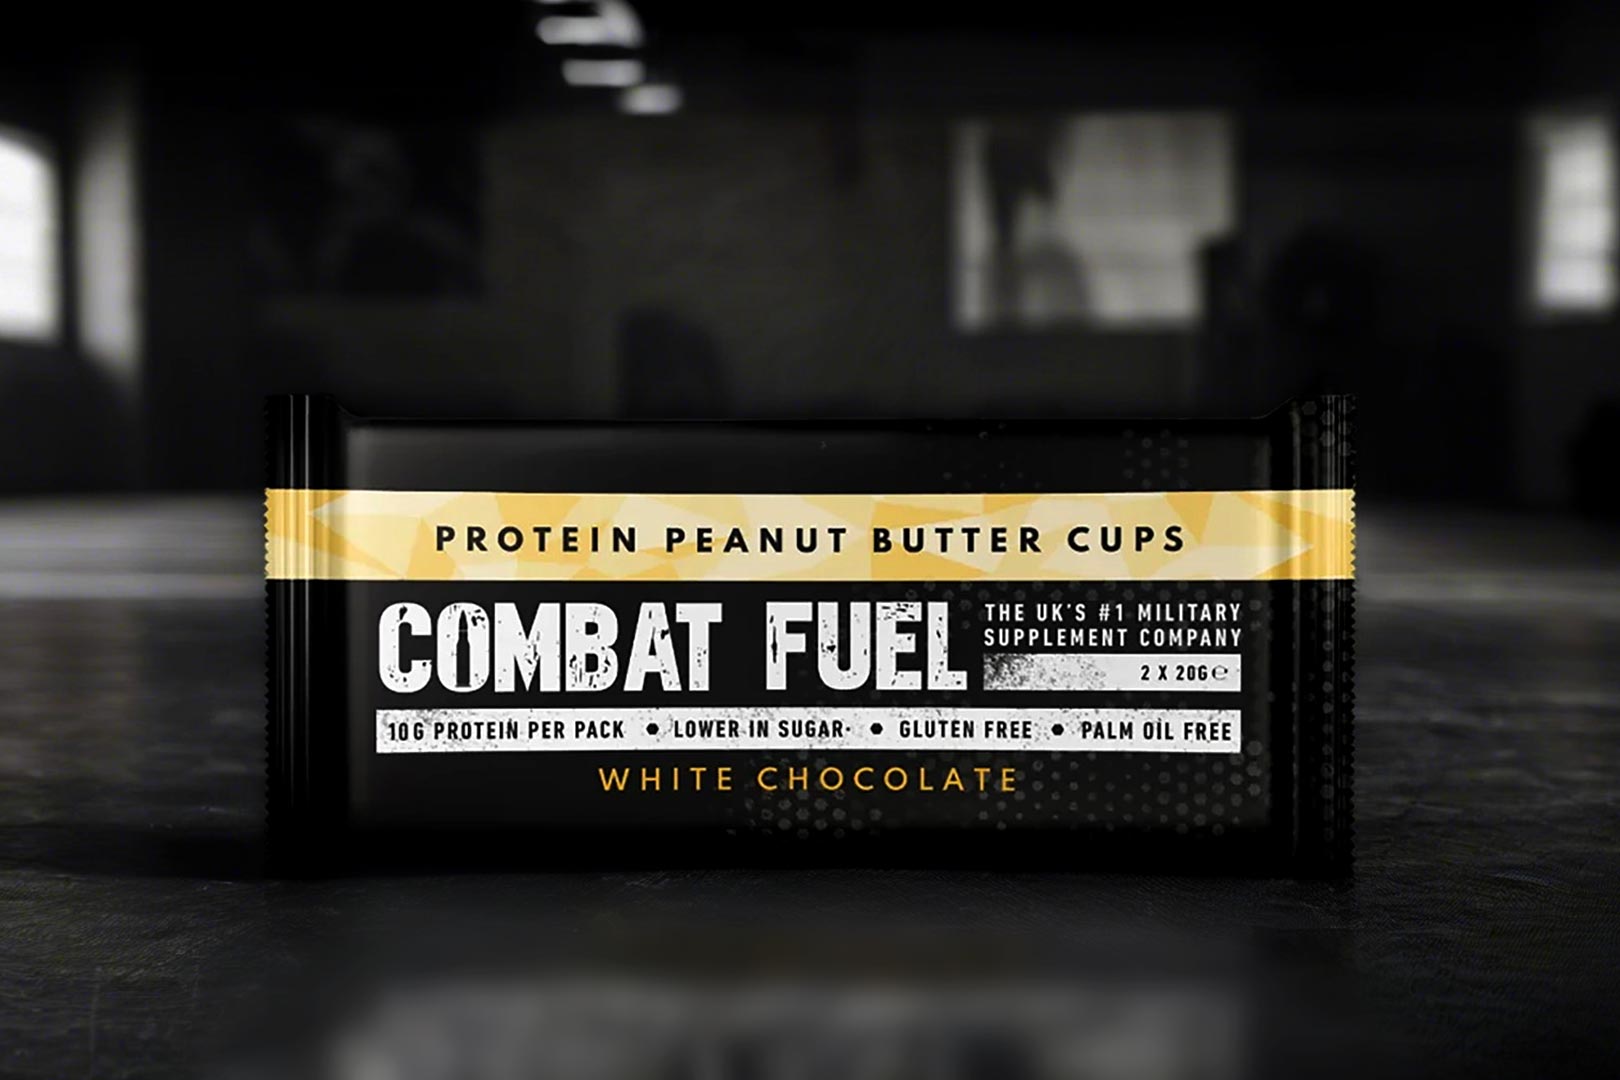 White Chocolate Combat Fuel Peanut Butter Cups